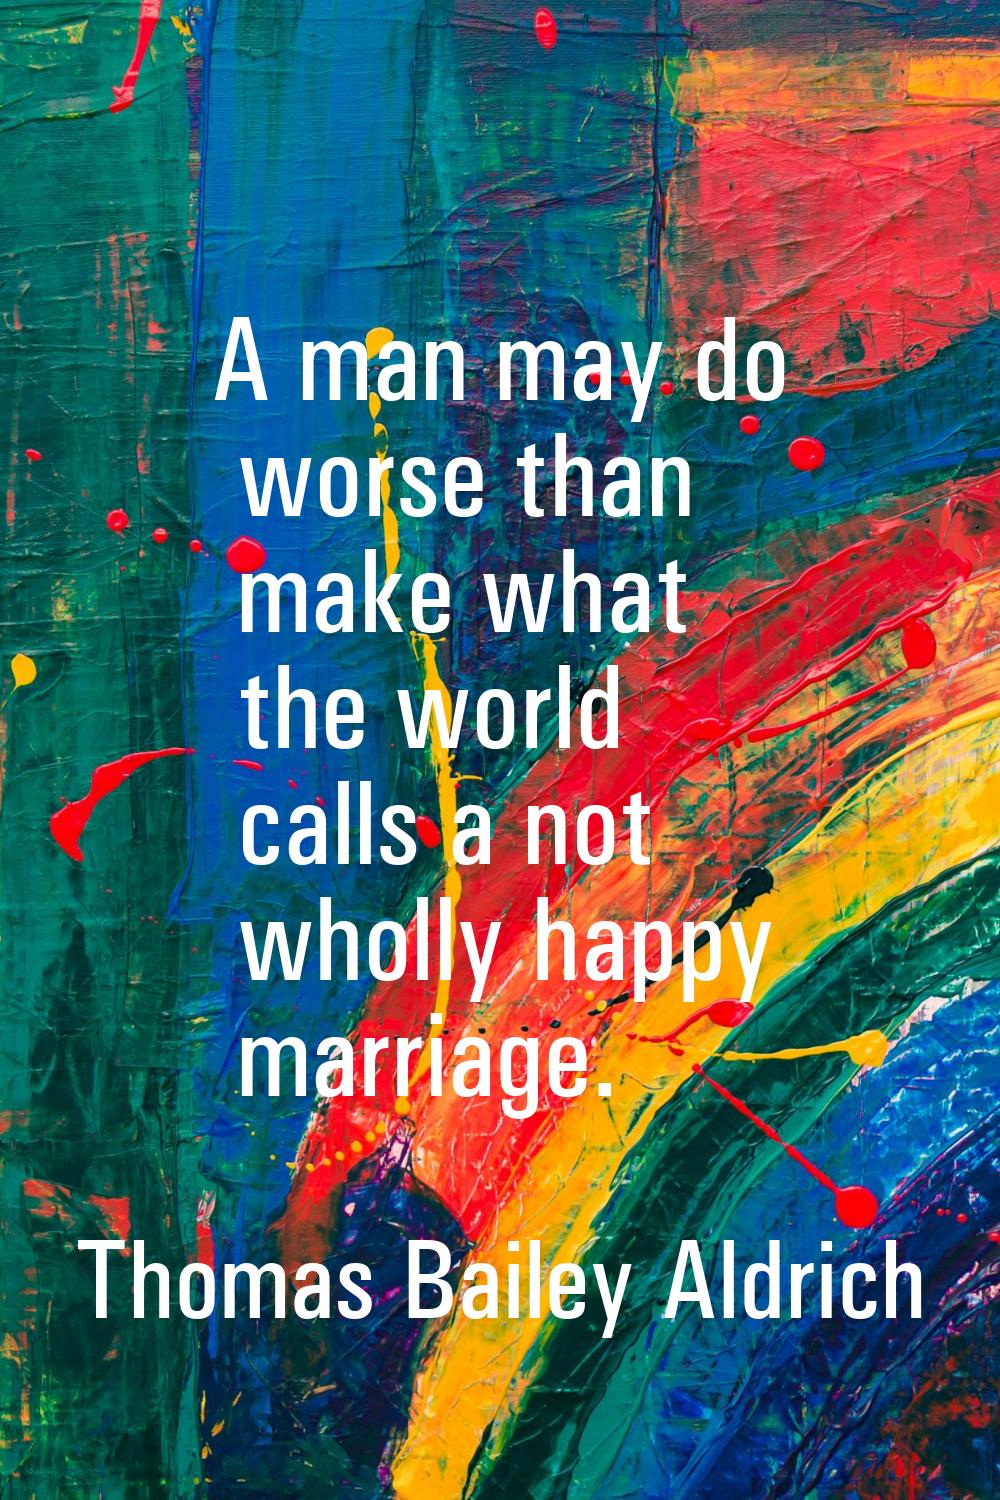 A man may do worse than make what the world calls a not wholly happy marriage.